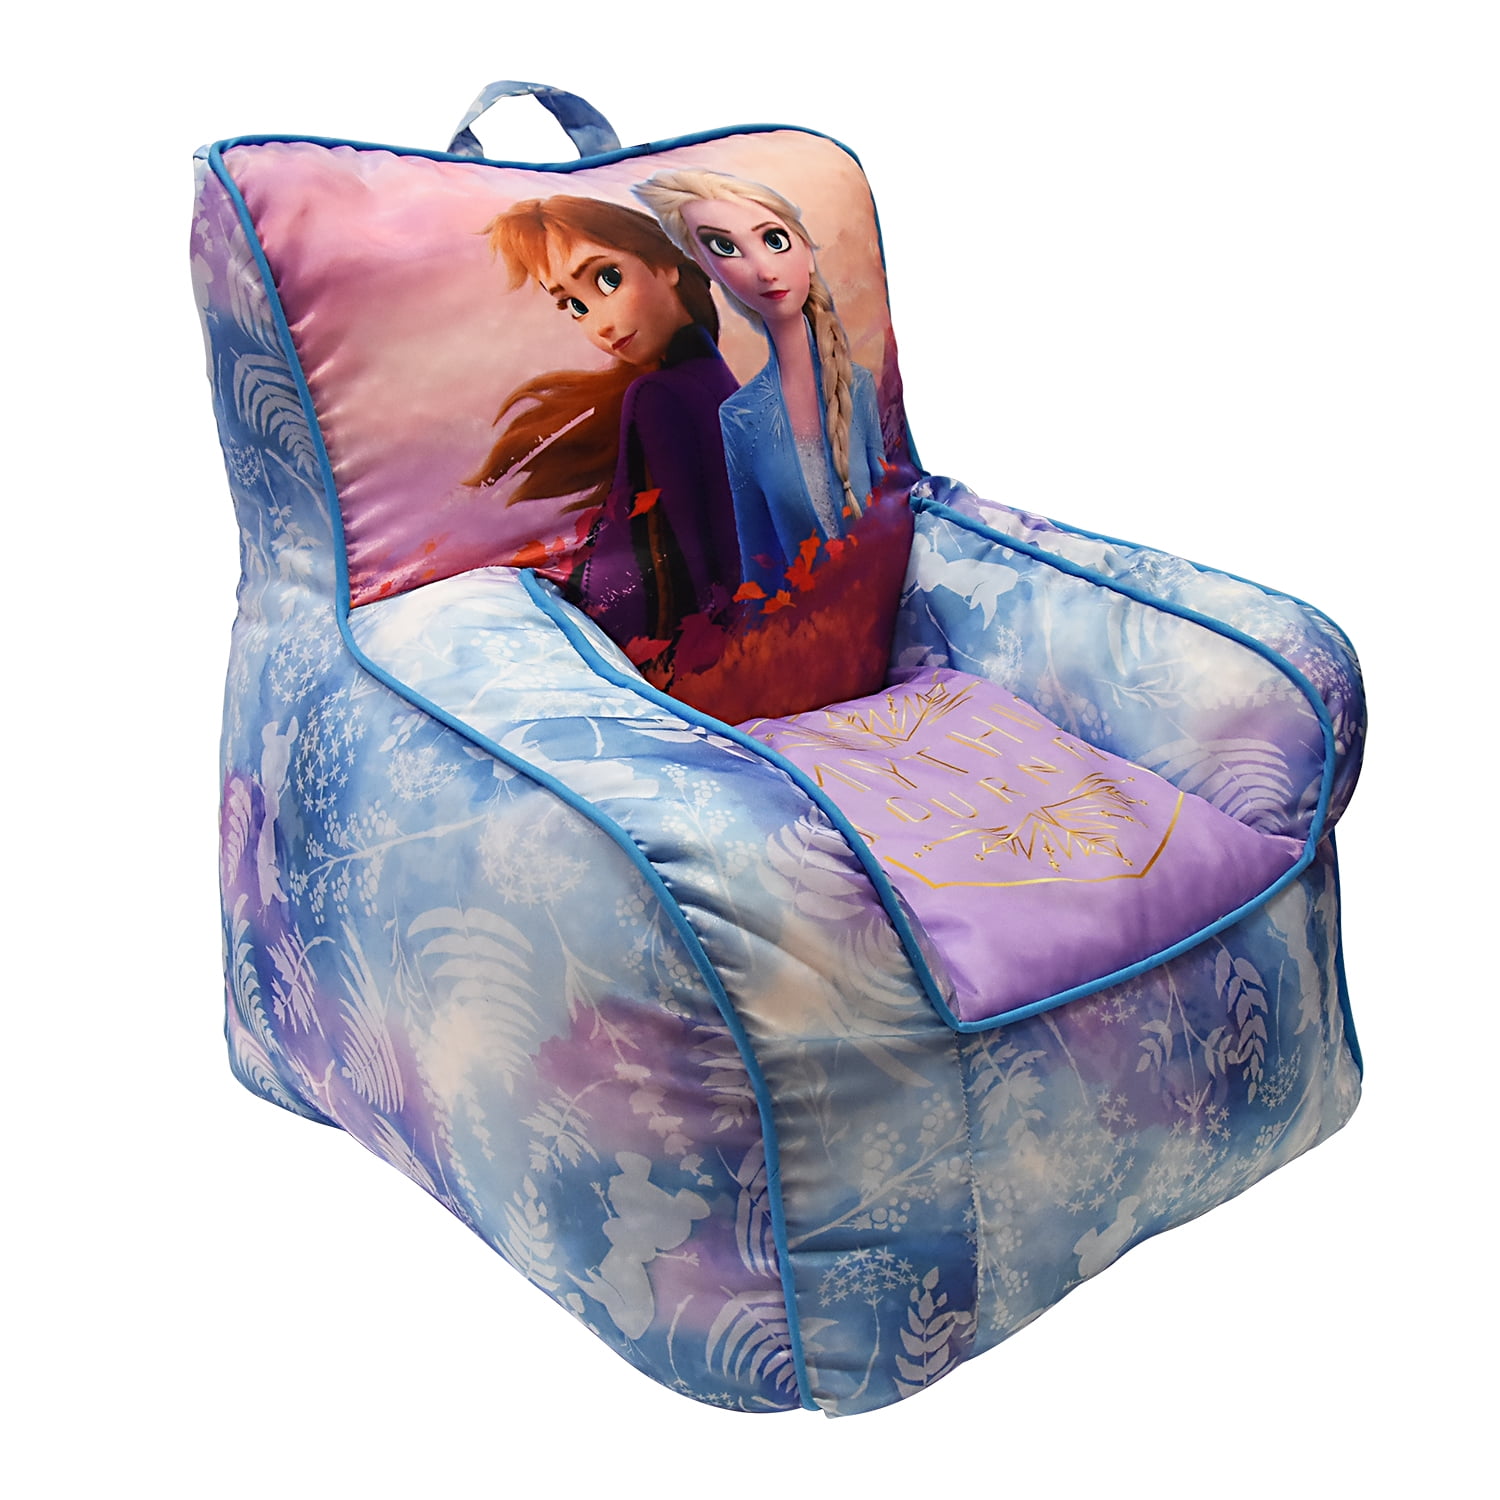 Disney Frozen 2 Element Bean Bag Filled Chair Seat Bed Play Room Elsa Anna Olaf 